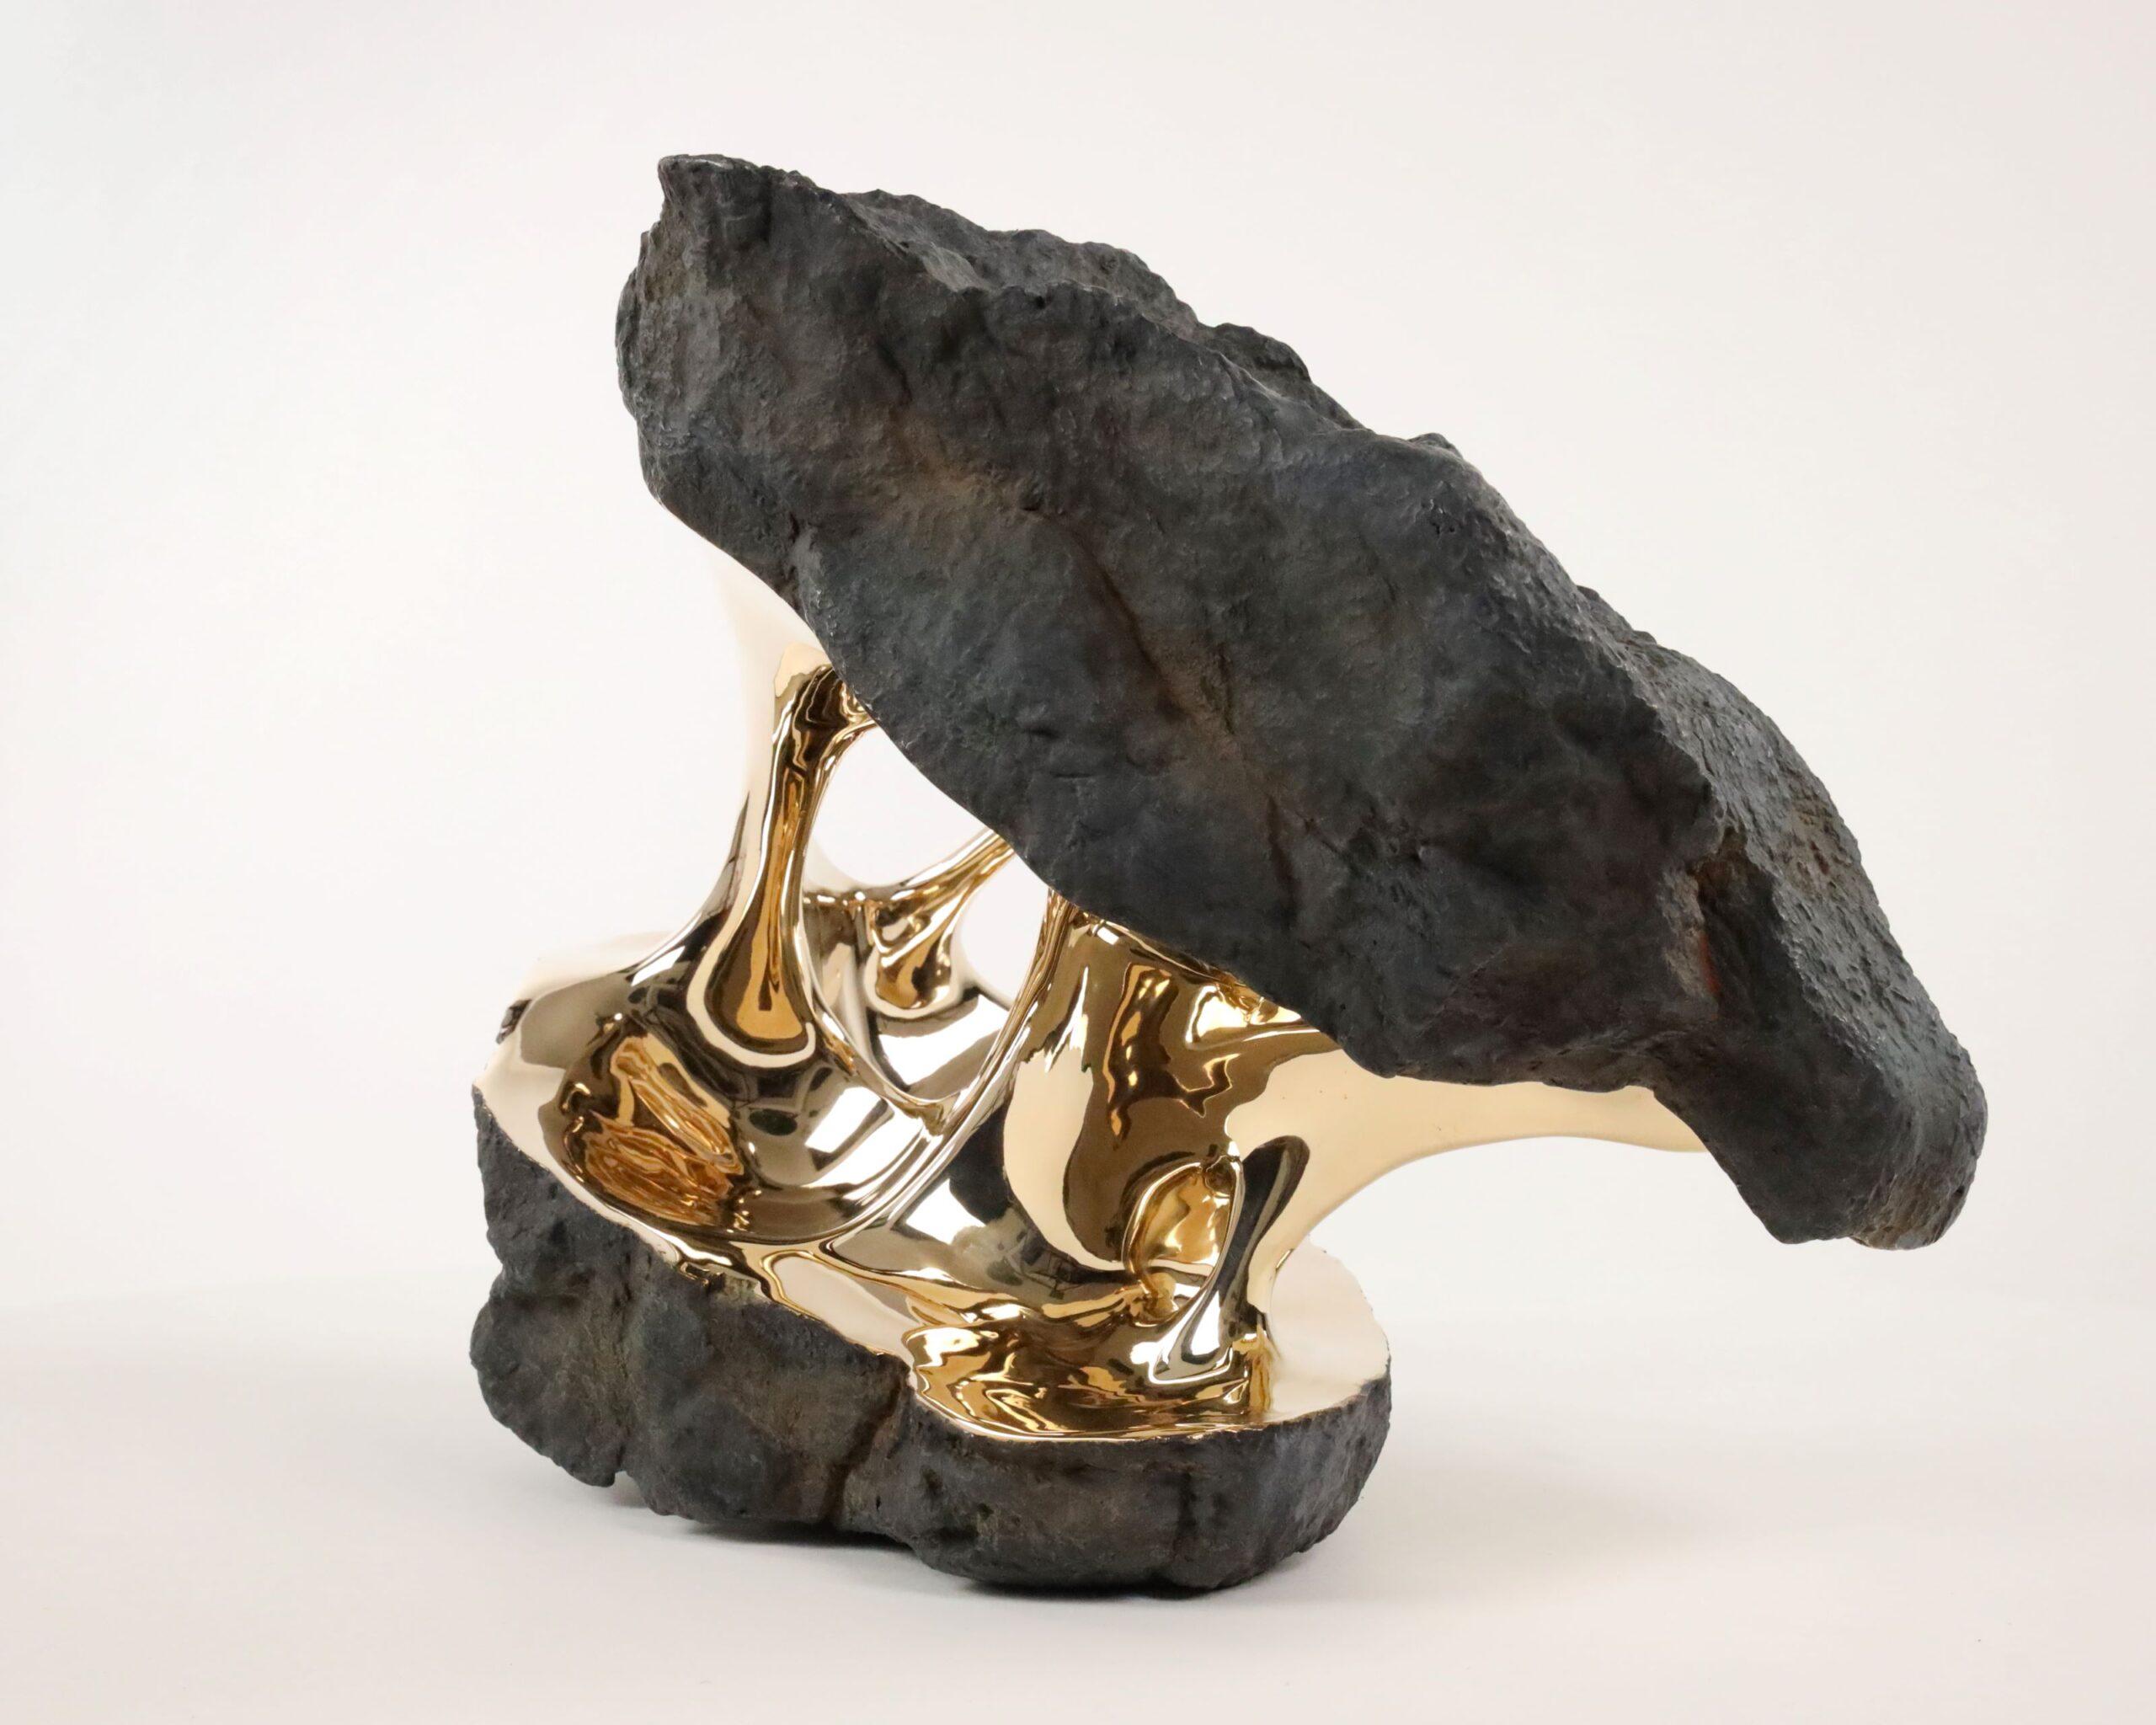 Alchemy by Romain Langlois - Rock-like bronze sculpture, golden, abstract For Sale 9